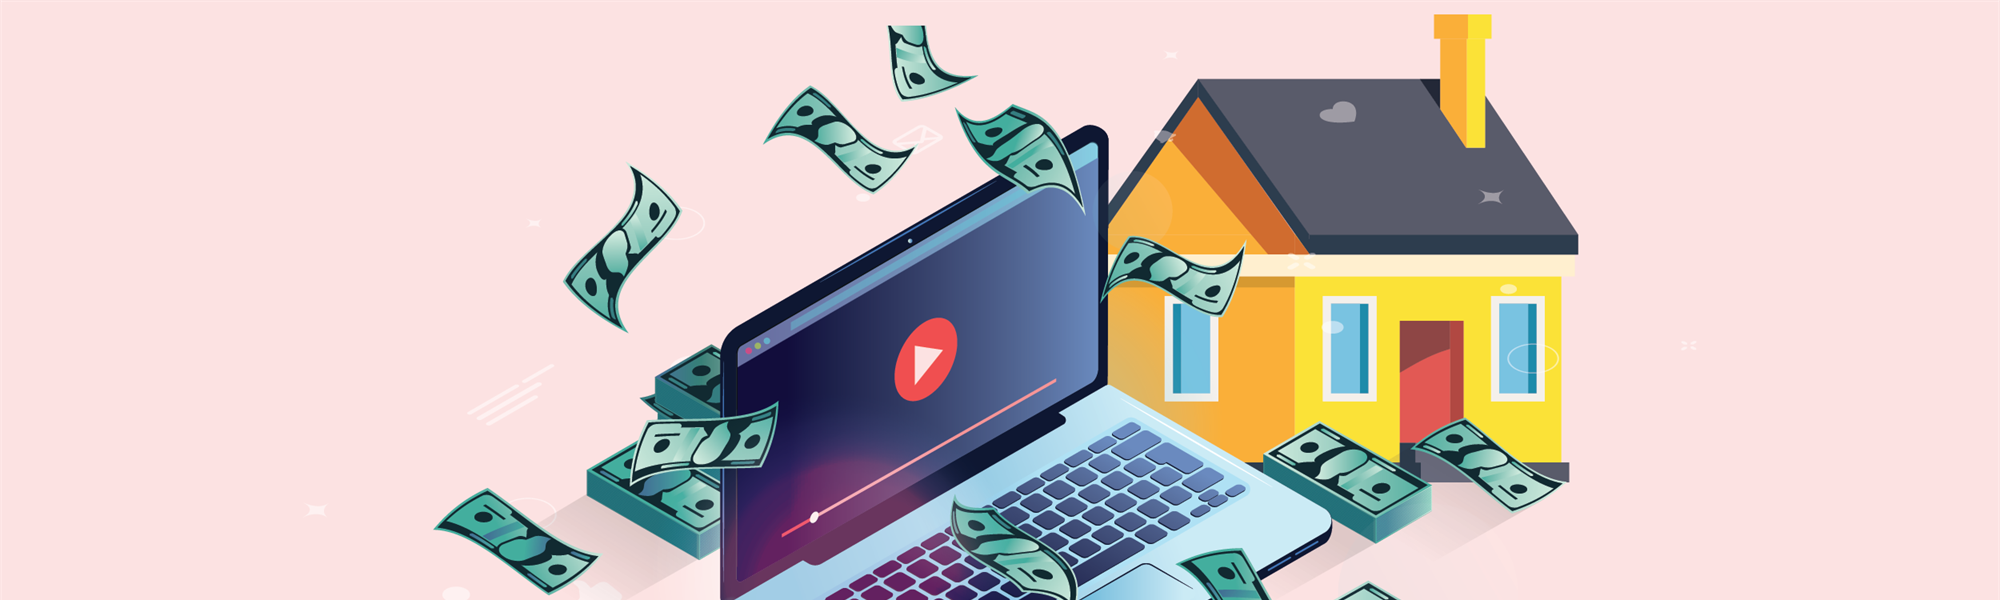 How One Simple Video Generated $11 Million in Listings in Just 90 Days